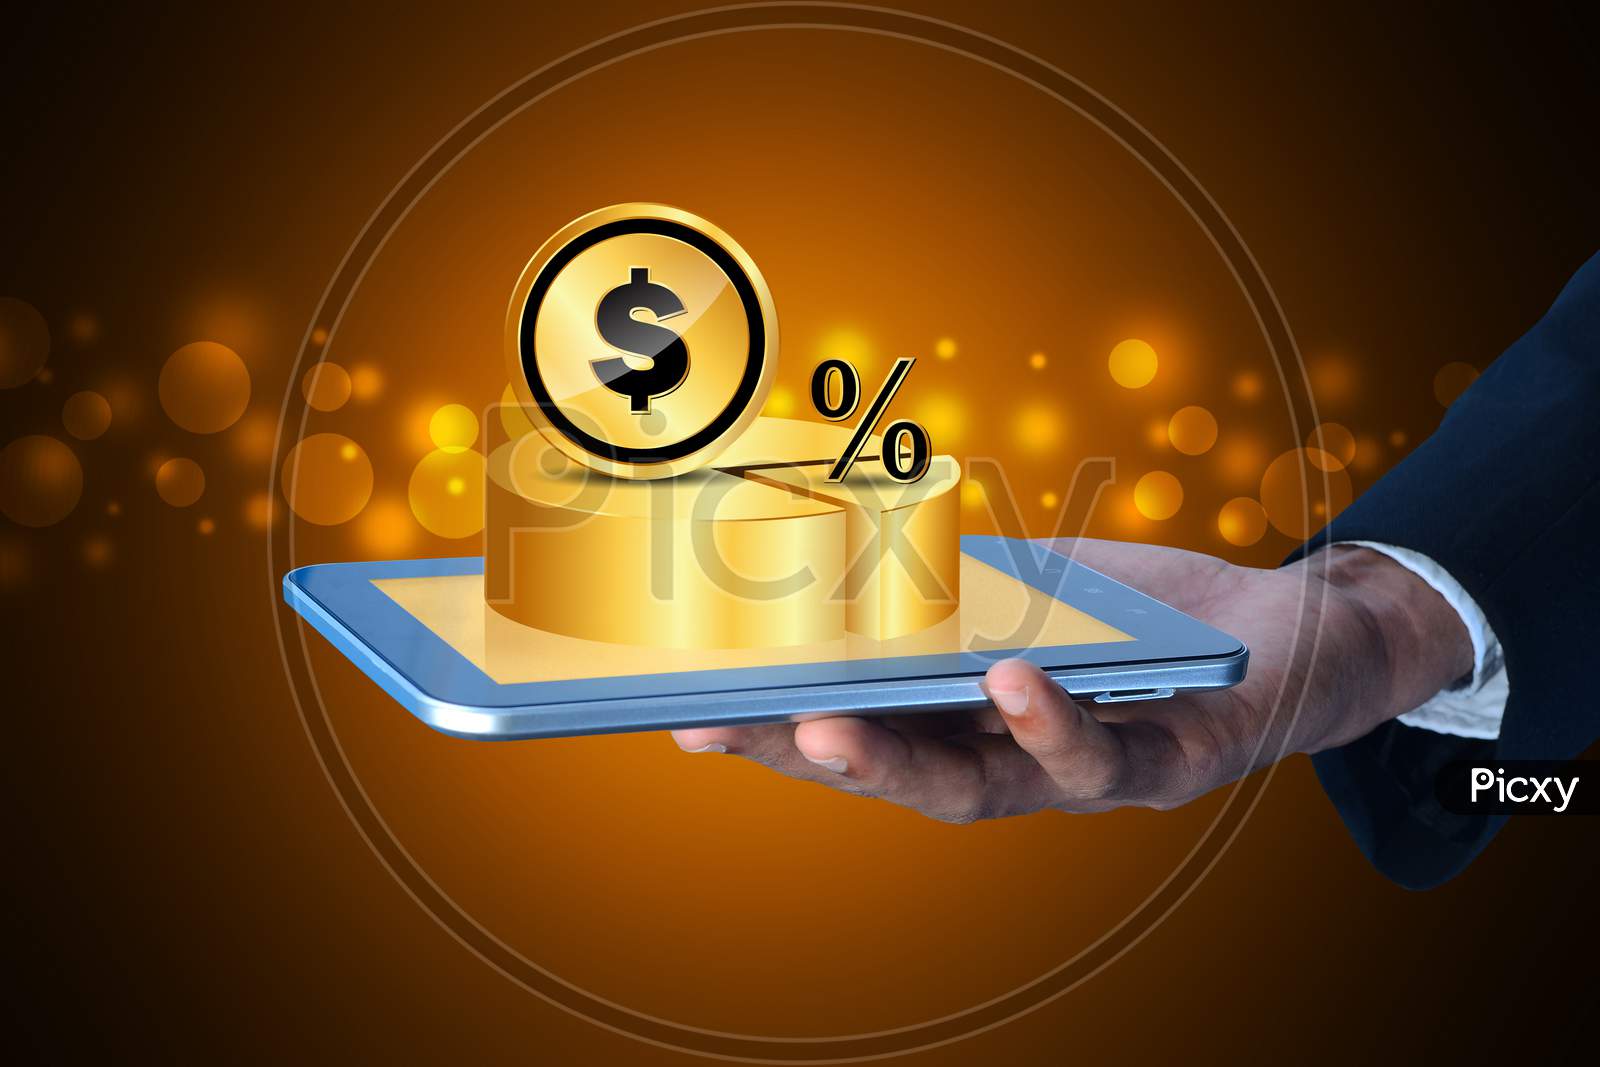 Close up shot of a Person's Hands Holding a Tablet or iPad with Pie Chart